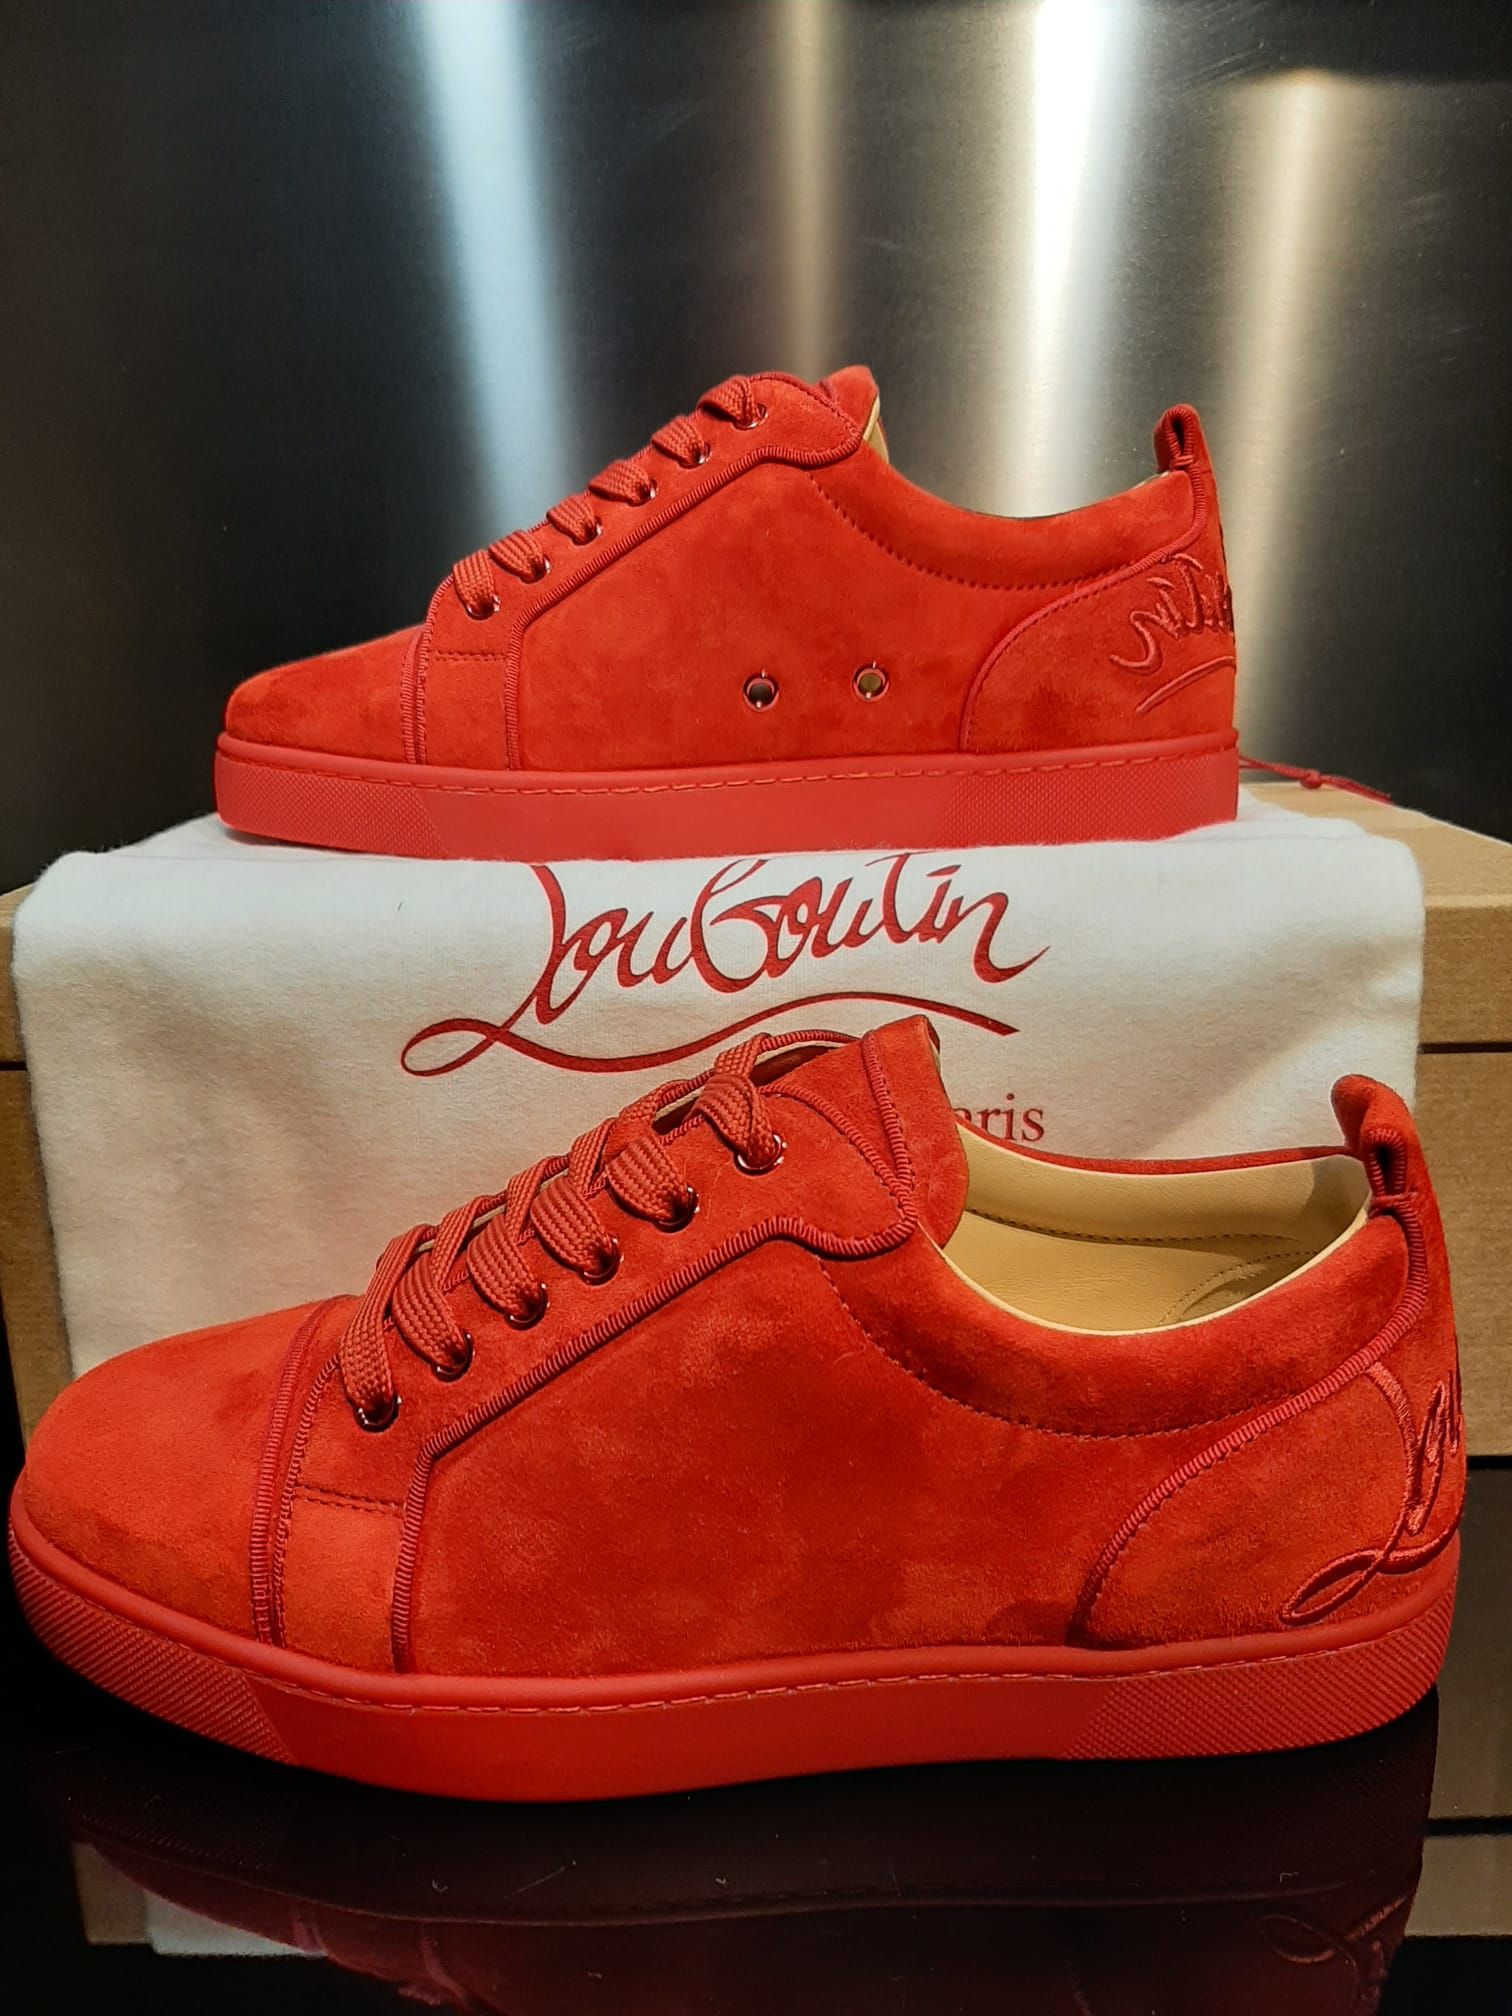 Red bottom Louis Vuitton spike sneakers for Sale in Kent, WA